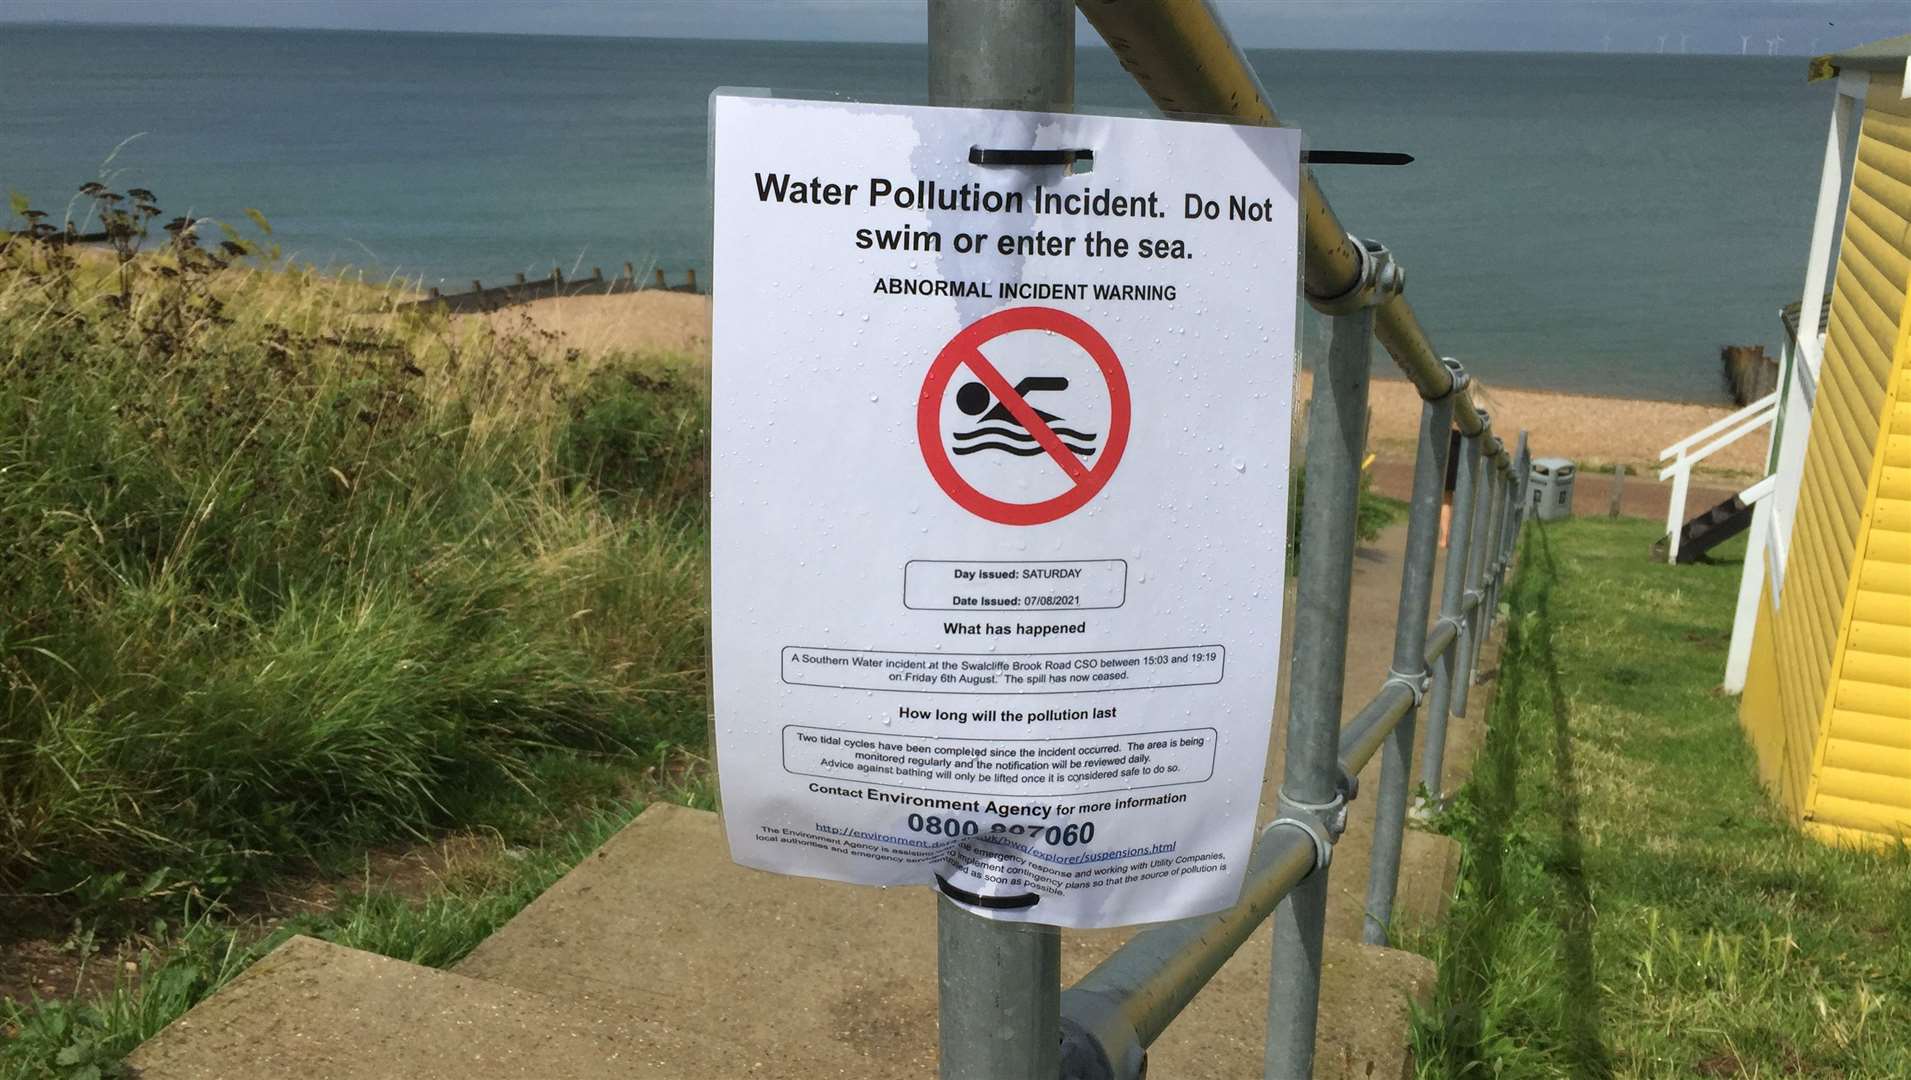 Previous 'Do not swim' signs in Tankerton after a pollution release at the Southern Water treatment site in Swalecliffe